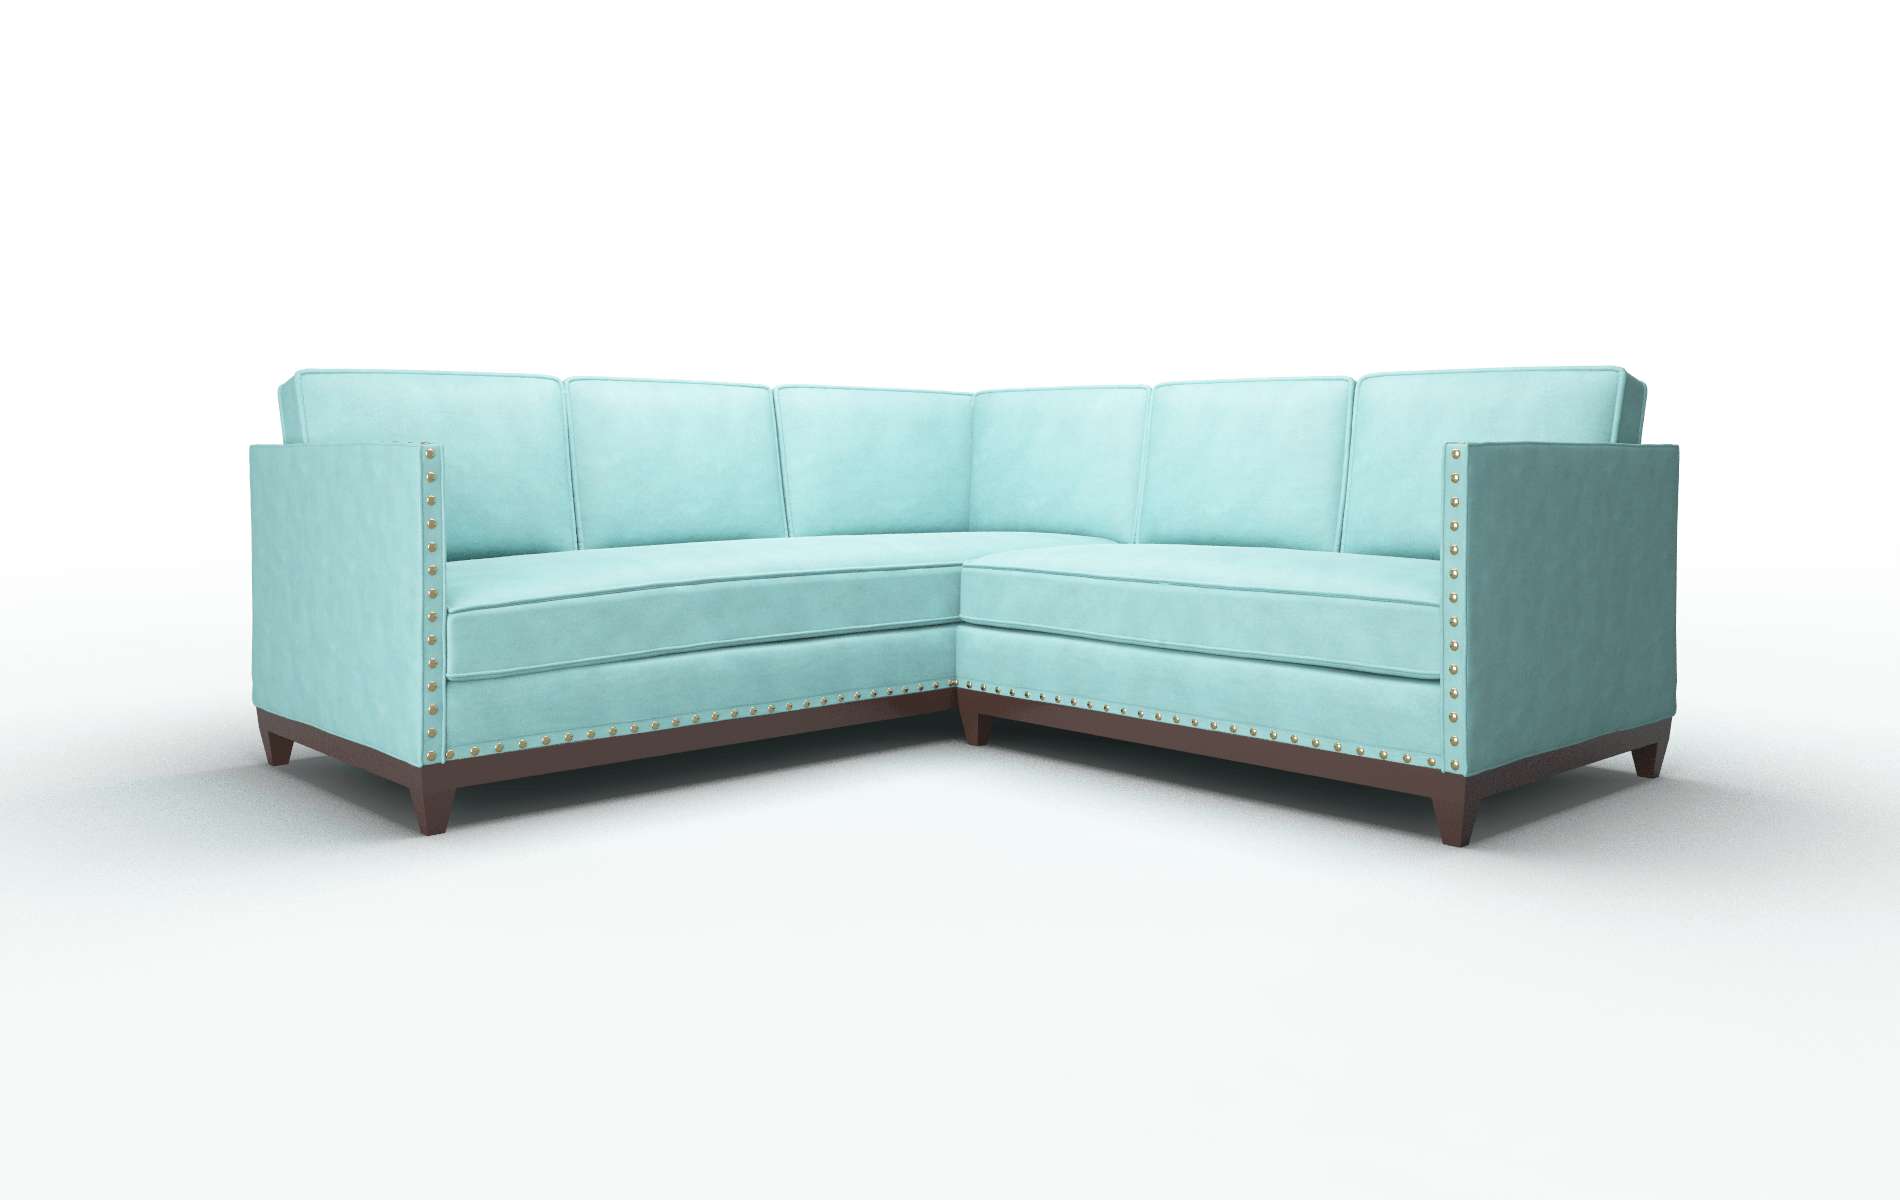 Florence Curious Turquoise chair espresso legs